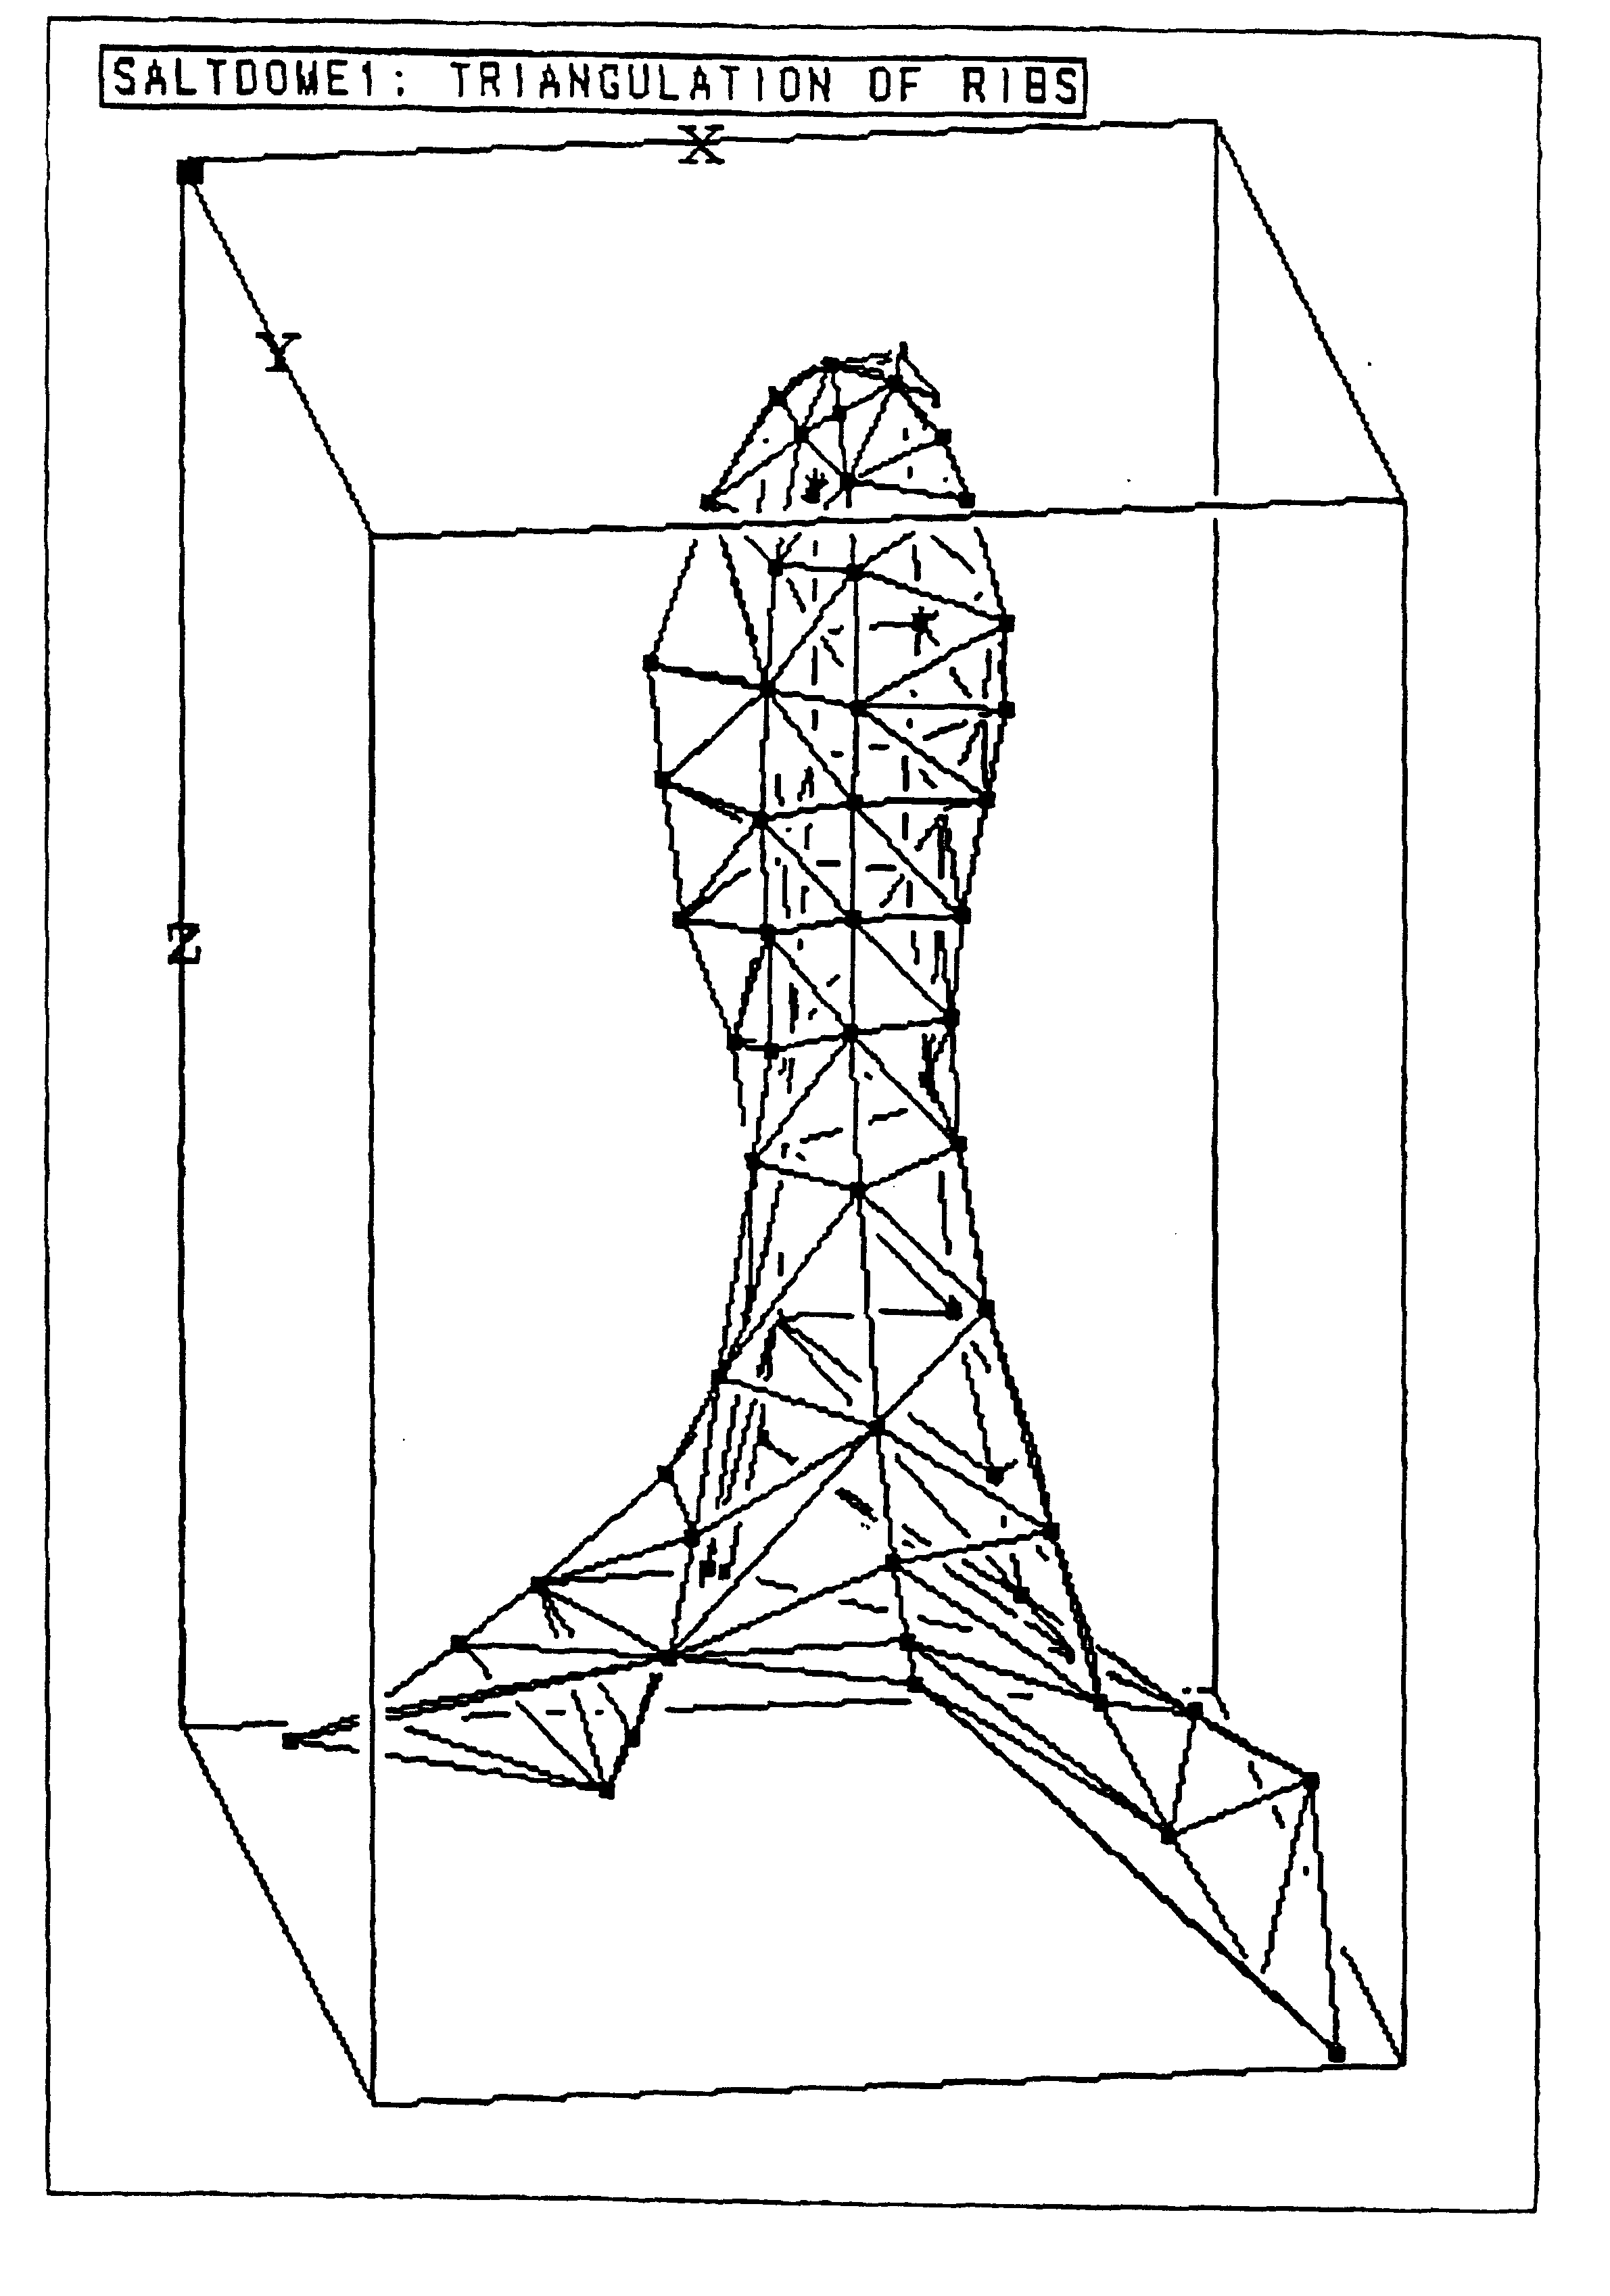 Method and apparatus for creating representations of geologic shapes